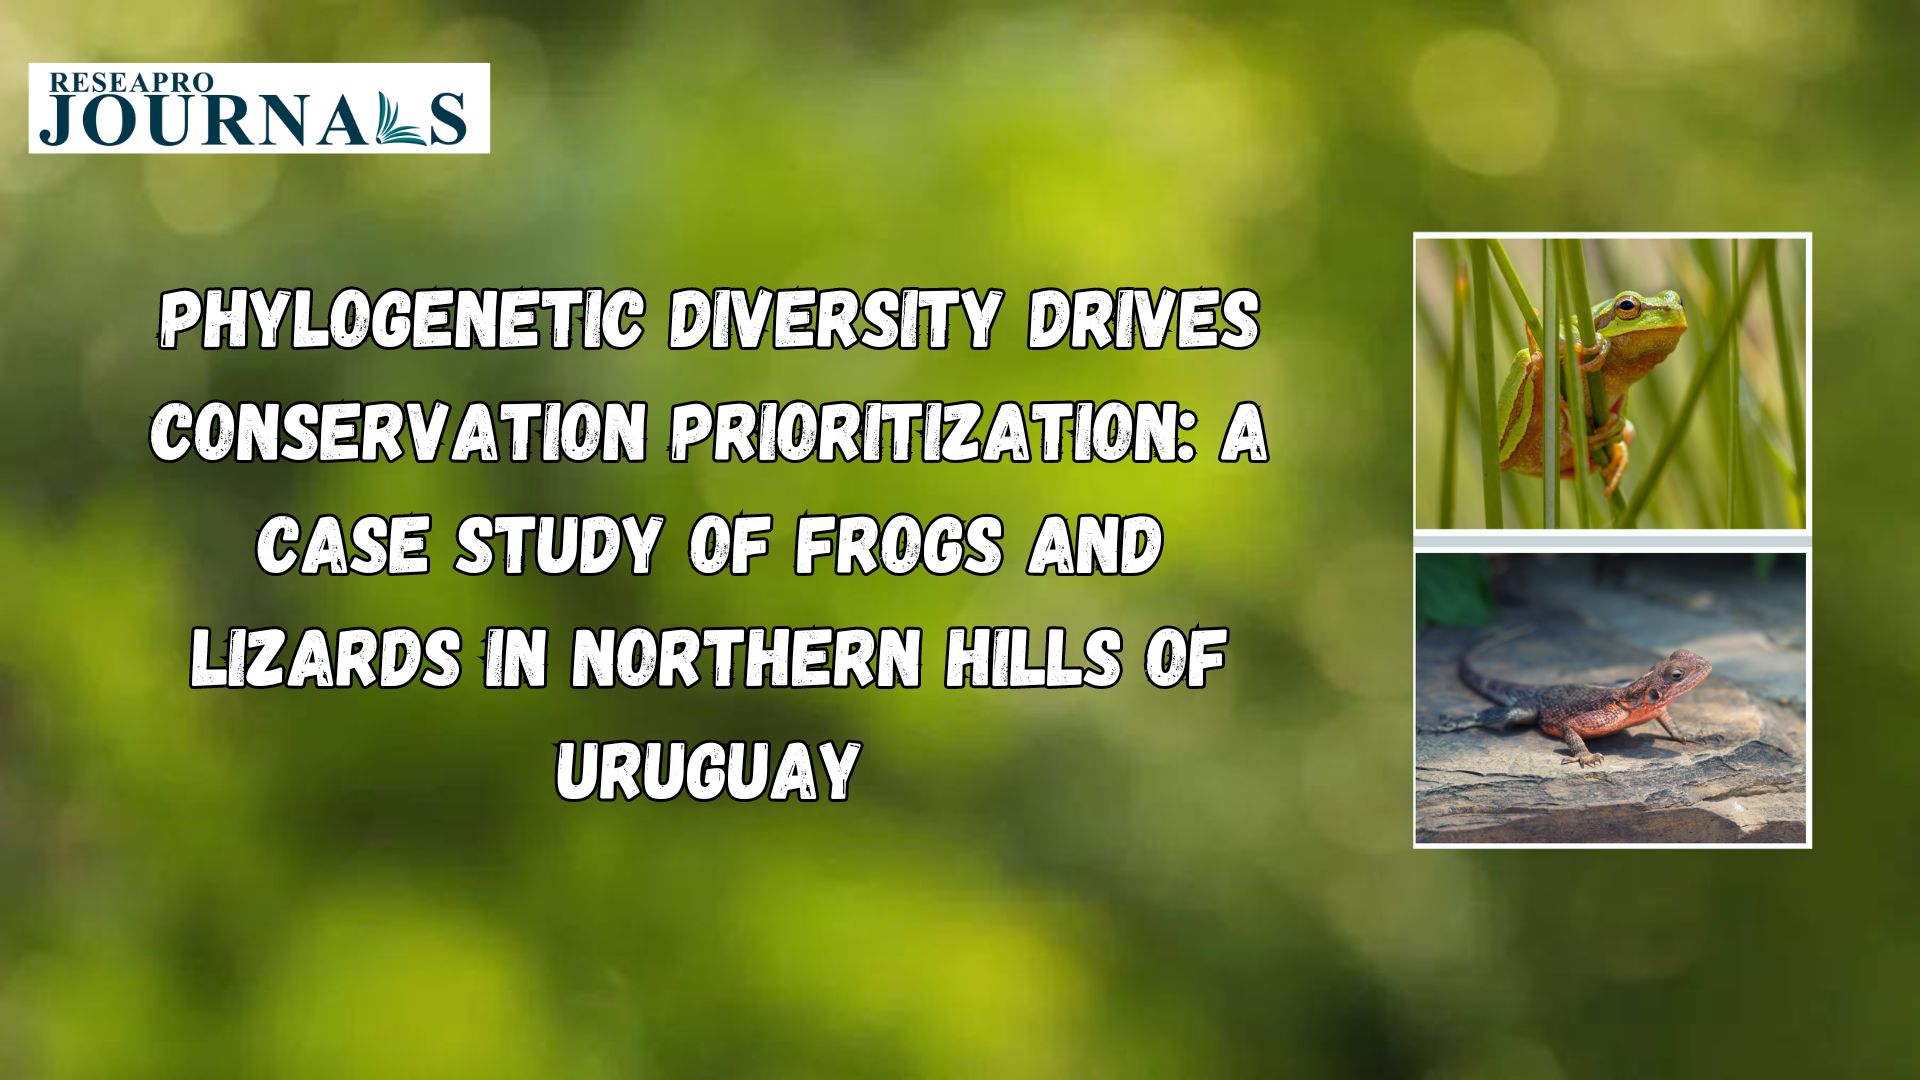 Phylogenetic Diversity Drives Conservation Prioritization: A Case Study of Frogs and Lizards in Northern Hills of Uruguay